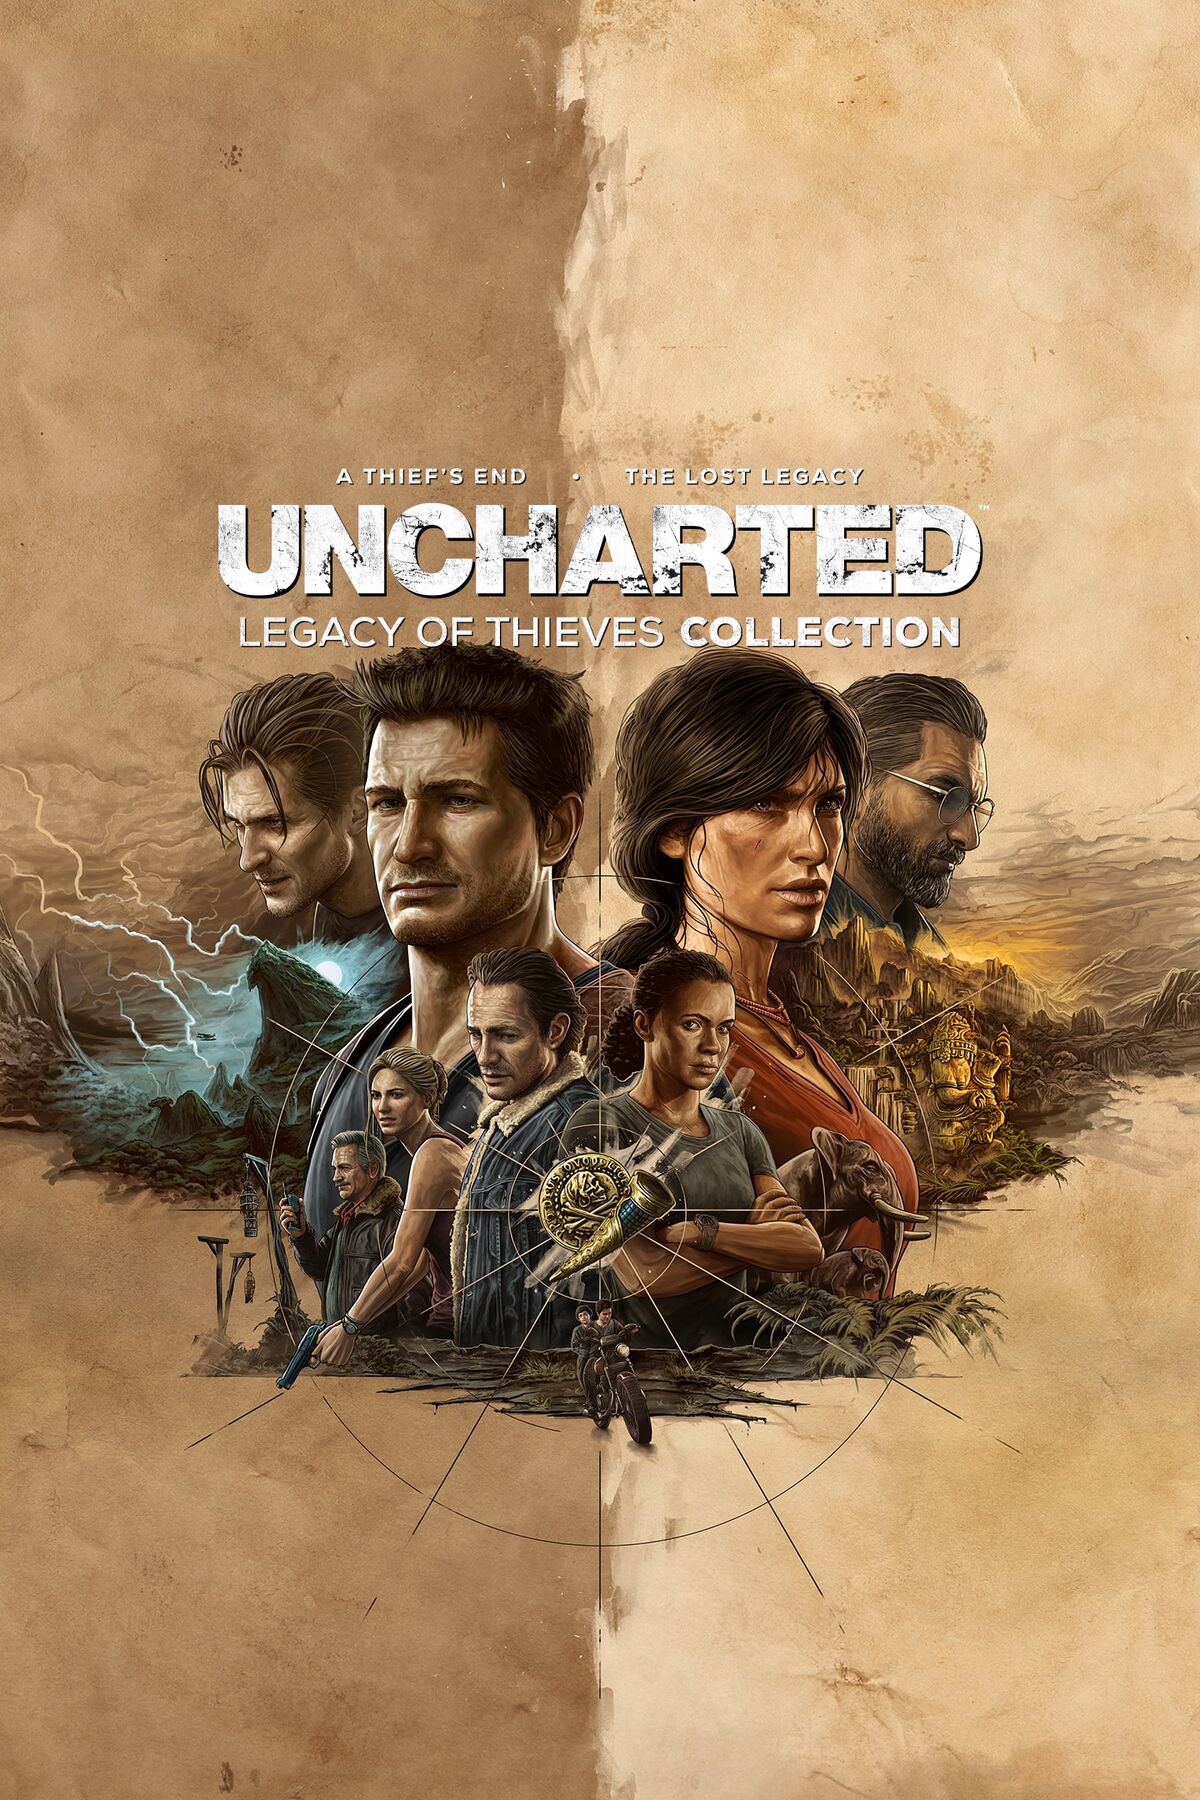 Uncharted 4: Lost Legacy PlayStation 3 Box Art Cover by mark_inou